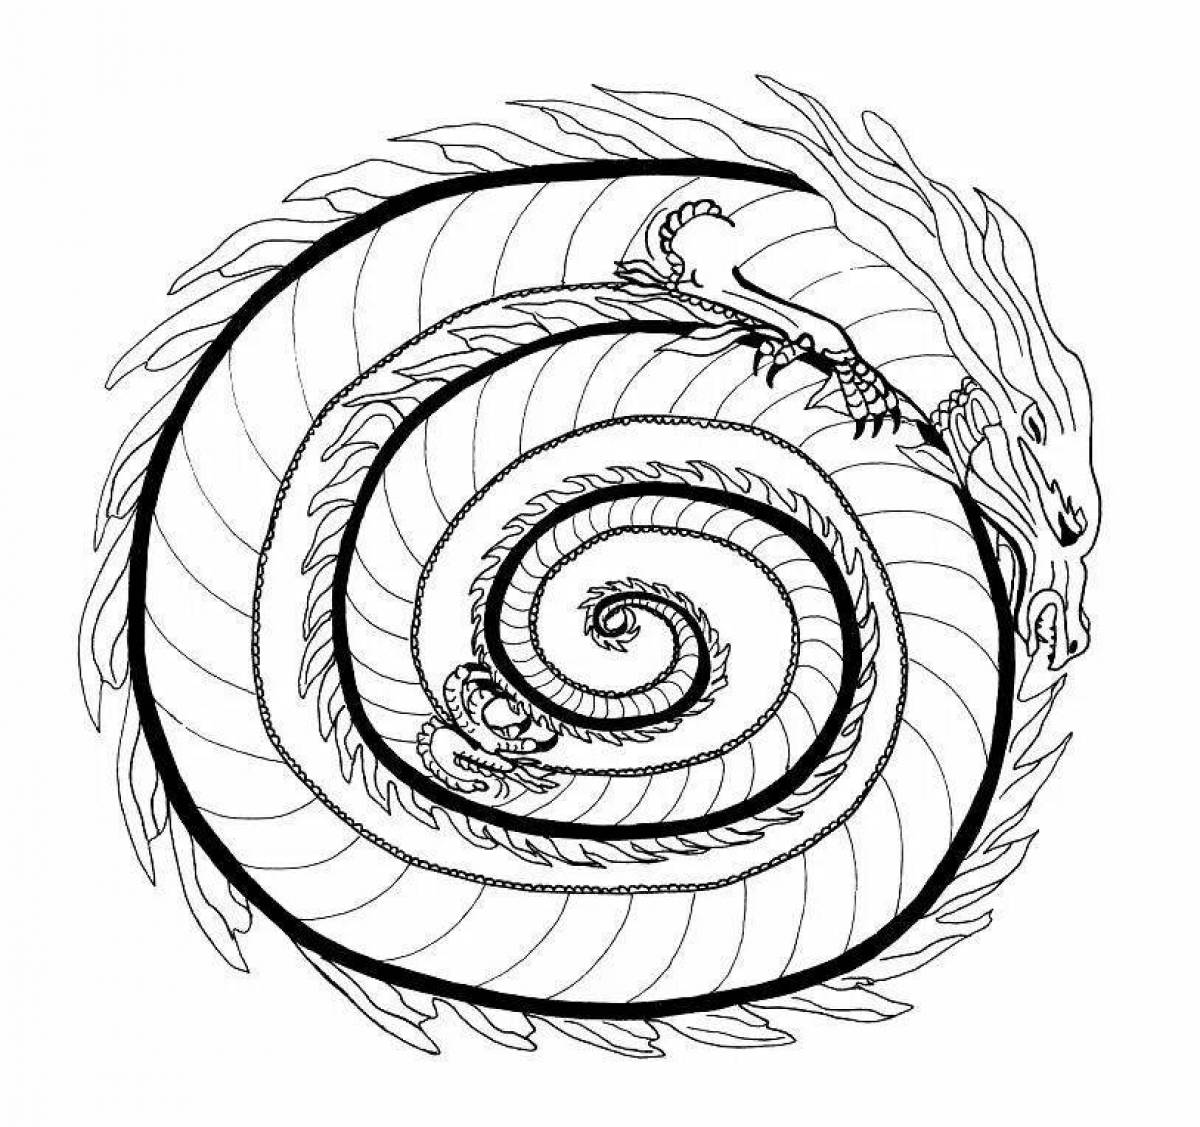 Fancy coloring spiral pattern